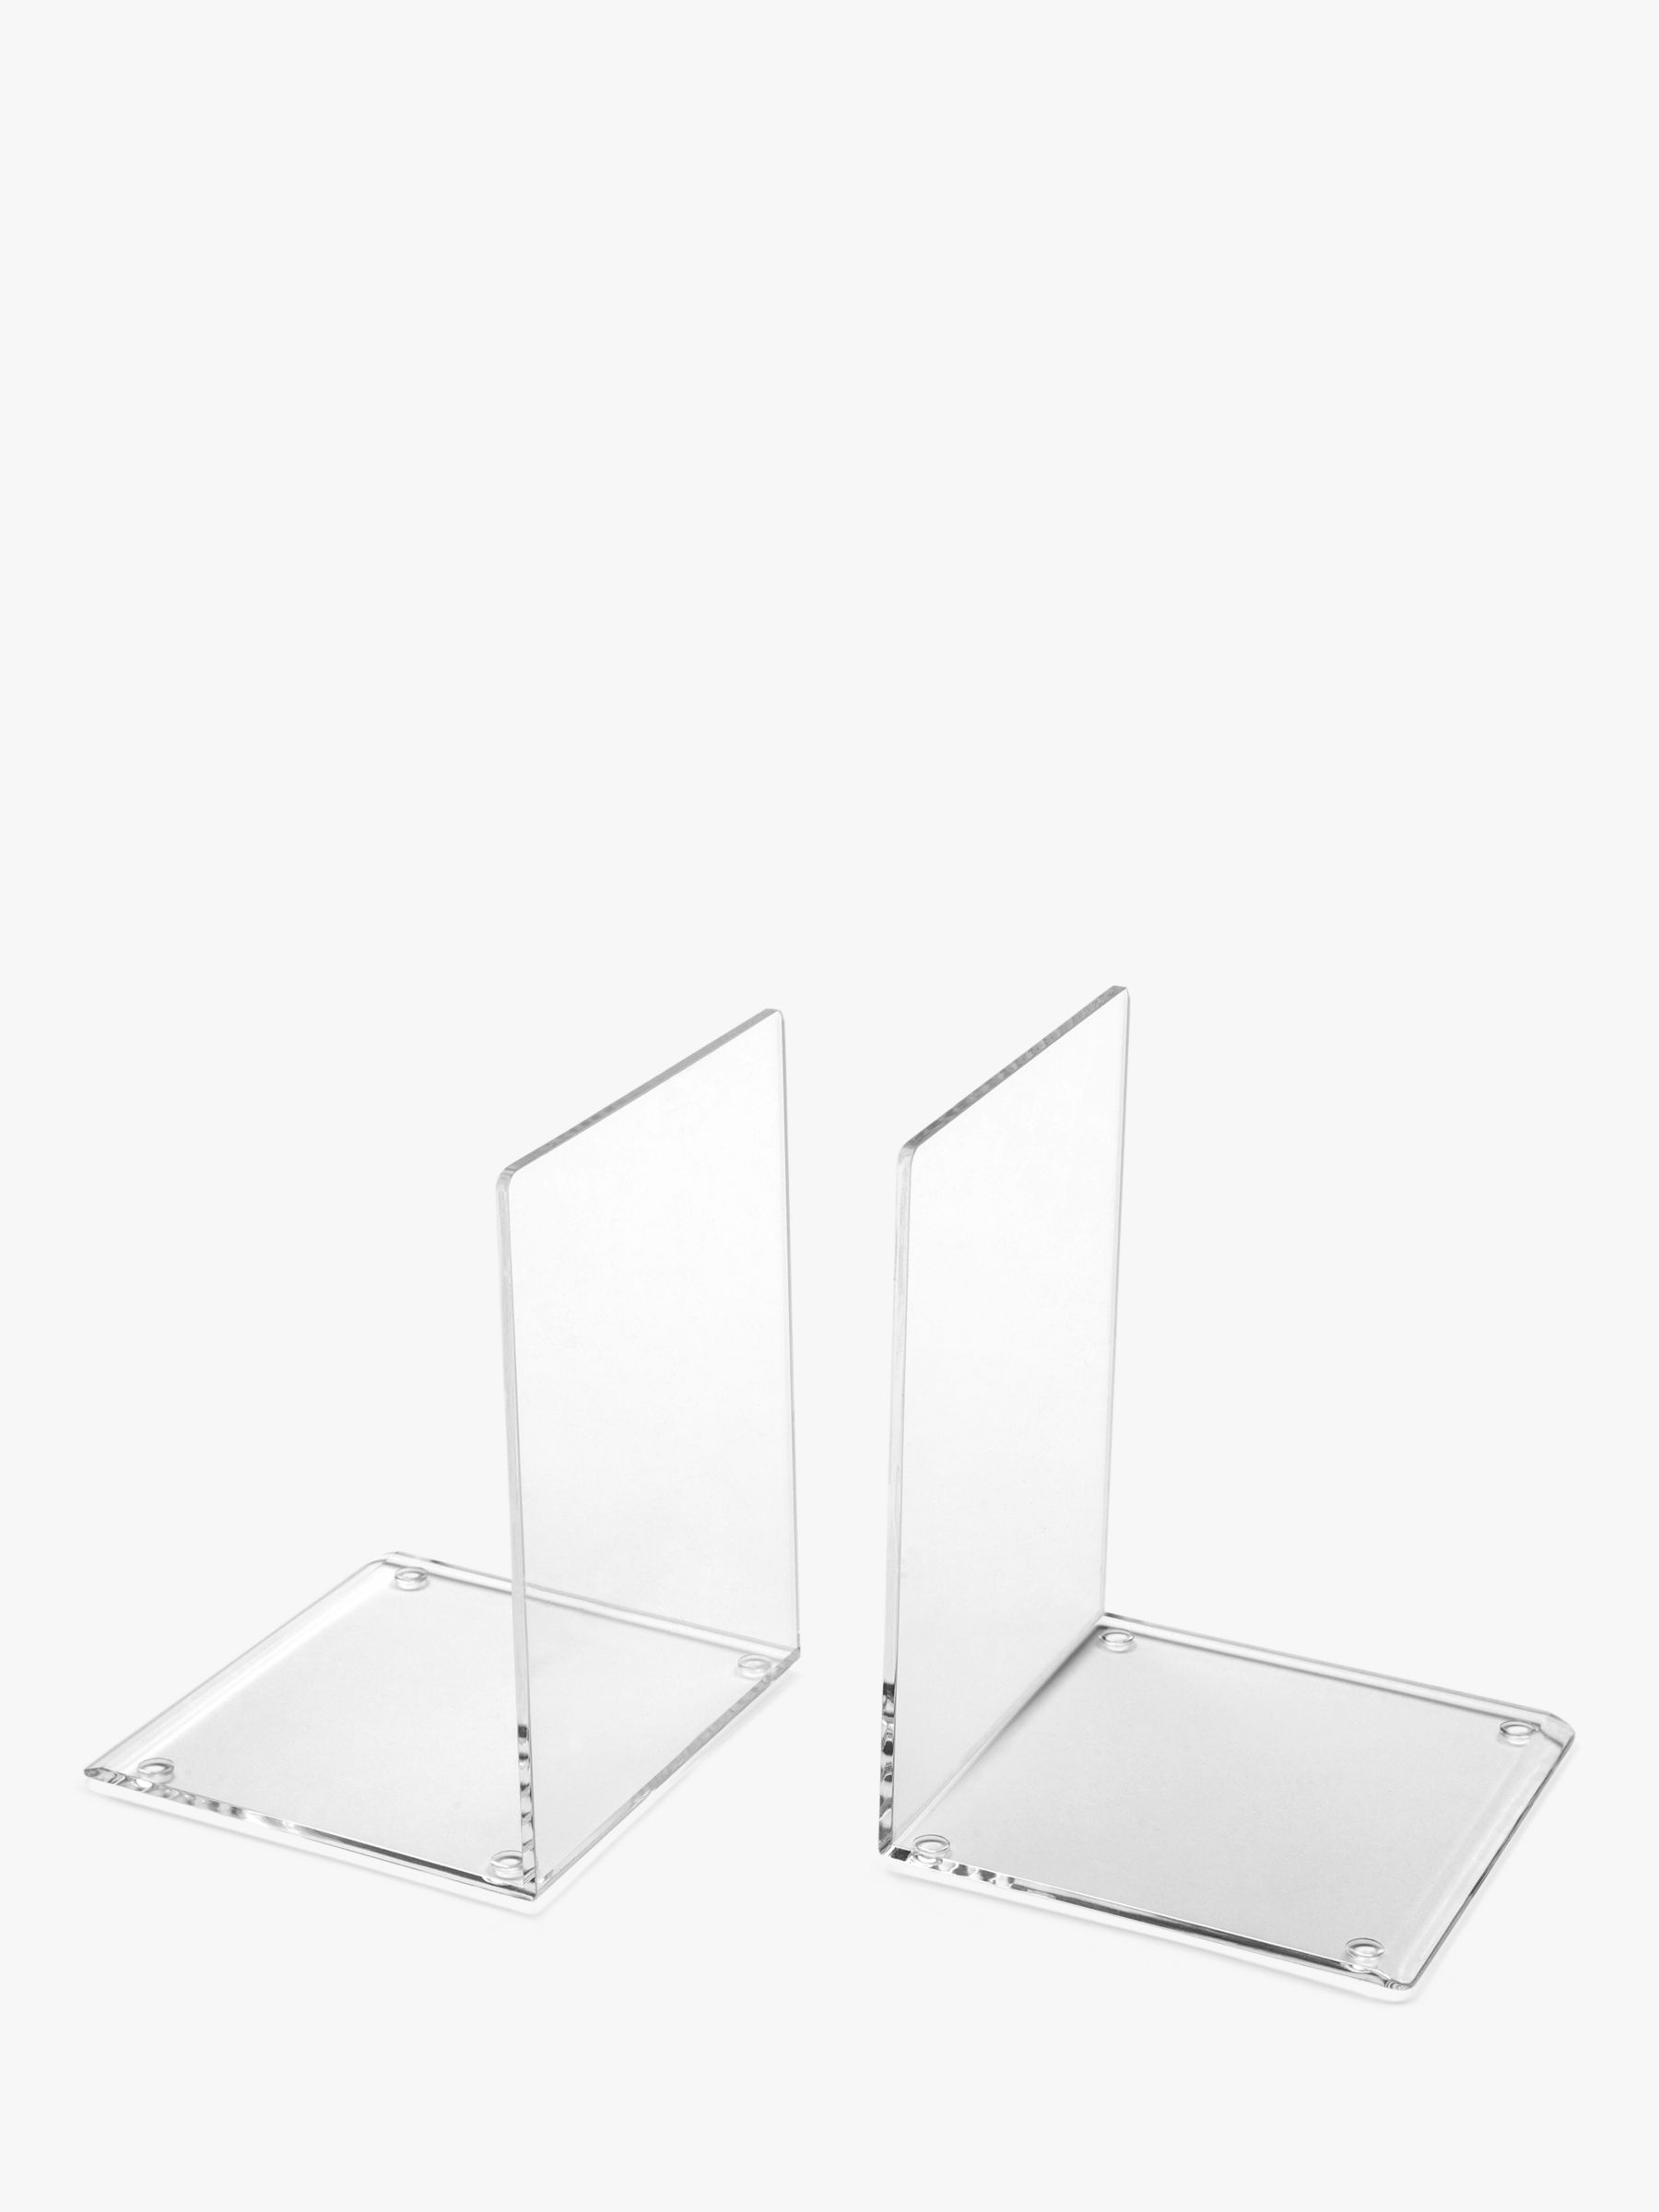 Acrylic Bookends